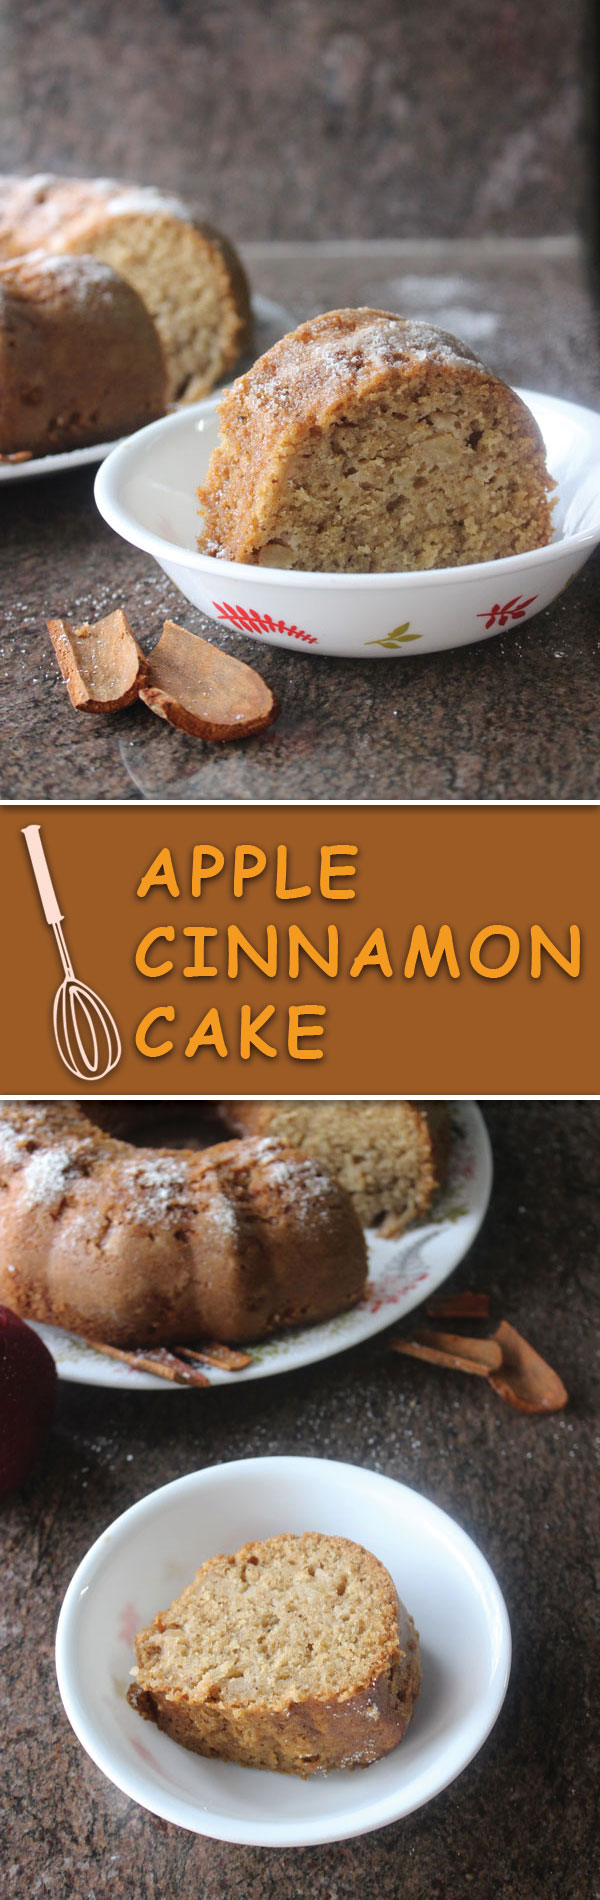 apple cinnamon cake - a super easy soft melt-in-mouth cake perfect for snacking! A great summer dessert for get togethers & even better for when the weather gets colder!